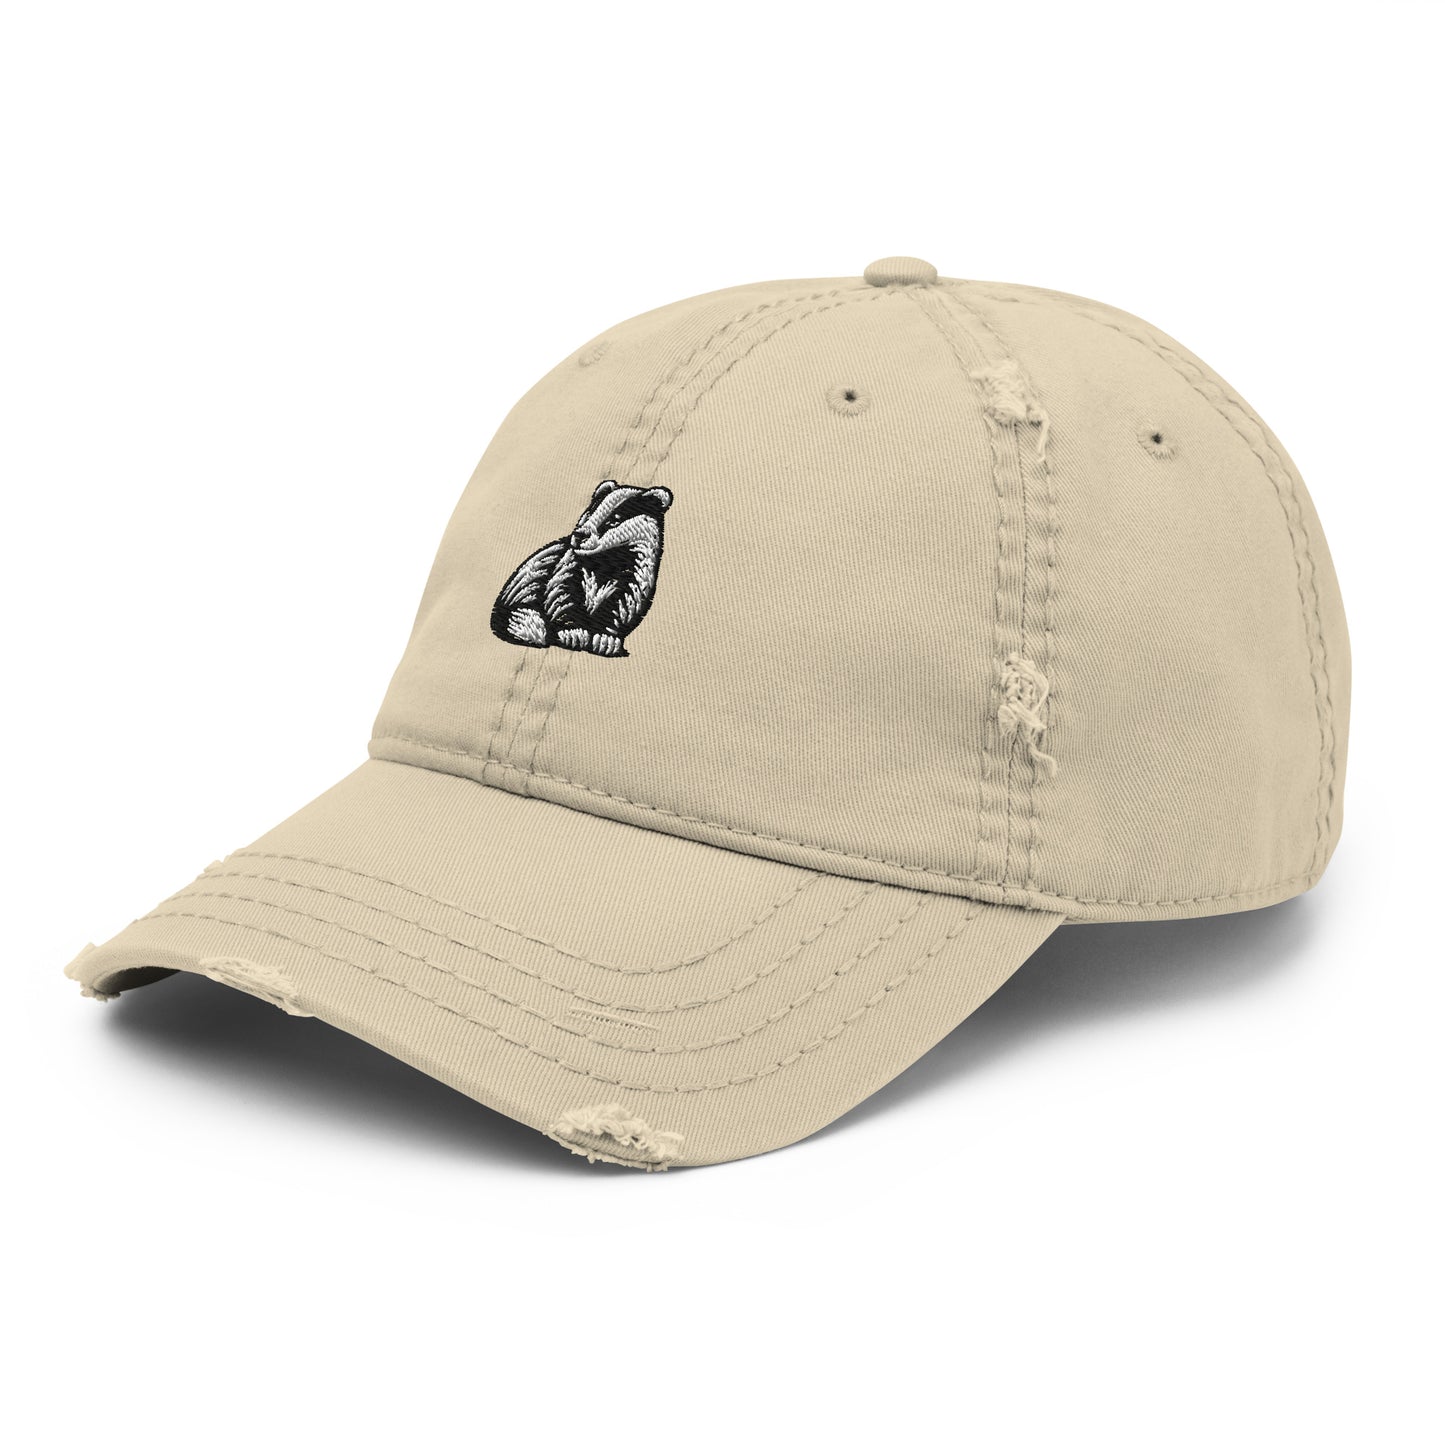  cap-from-the-front-with-badger-symbol